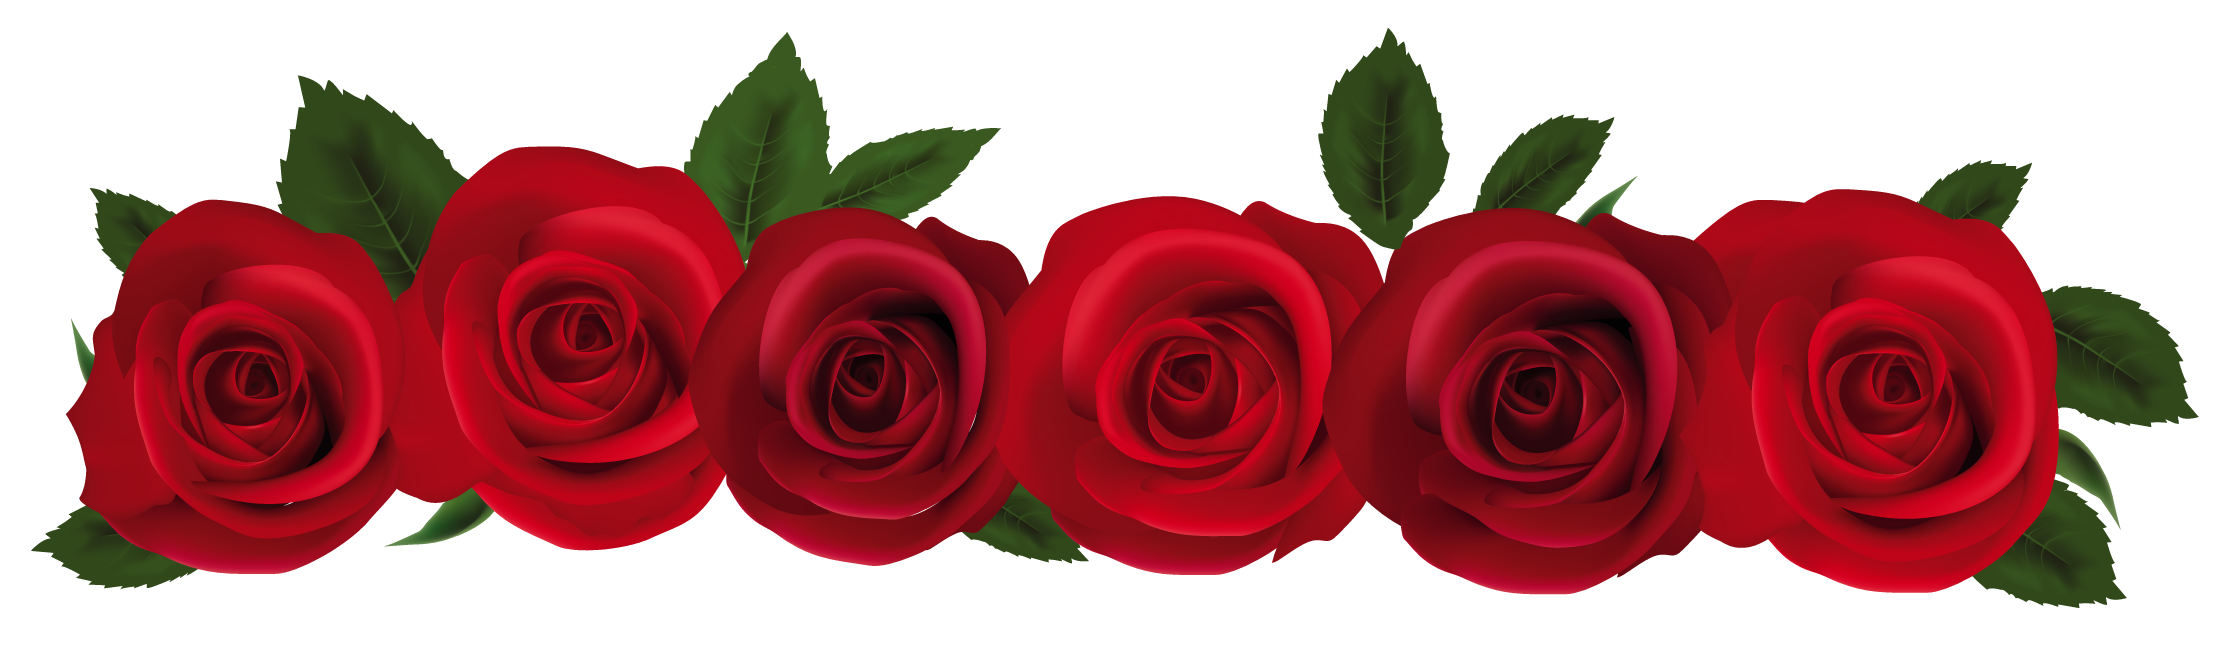 Rose PNG High-Quality Image